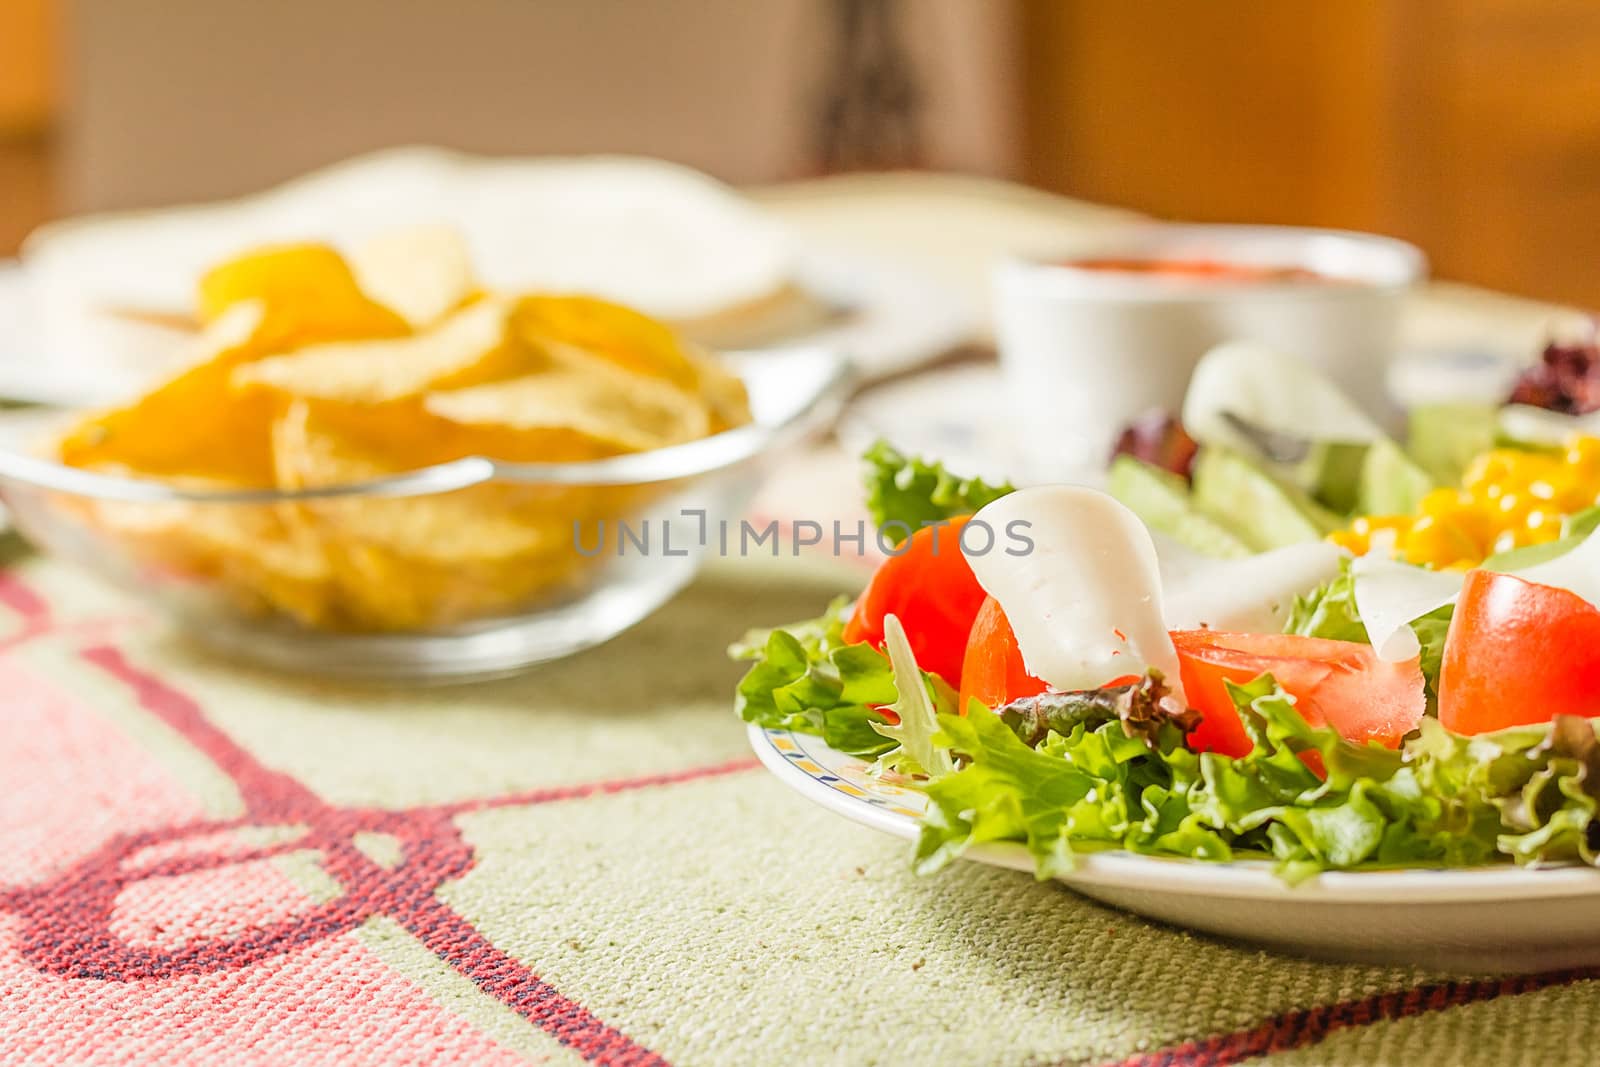 Traditional mexican food with a plate of fresh salad, tortillas, by doble.d